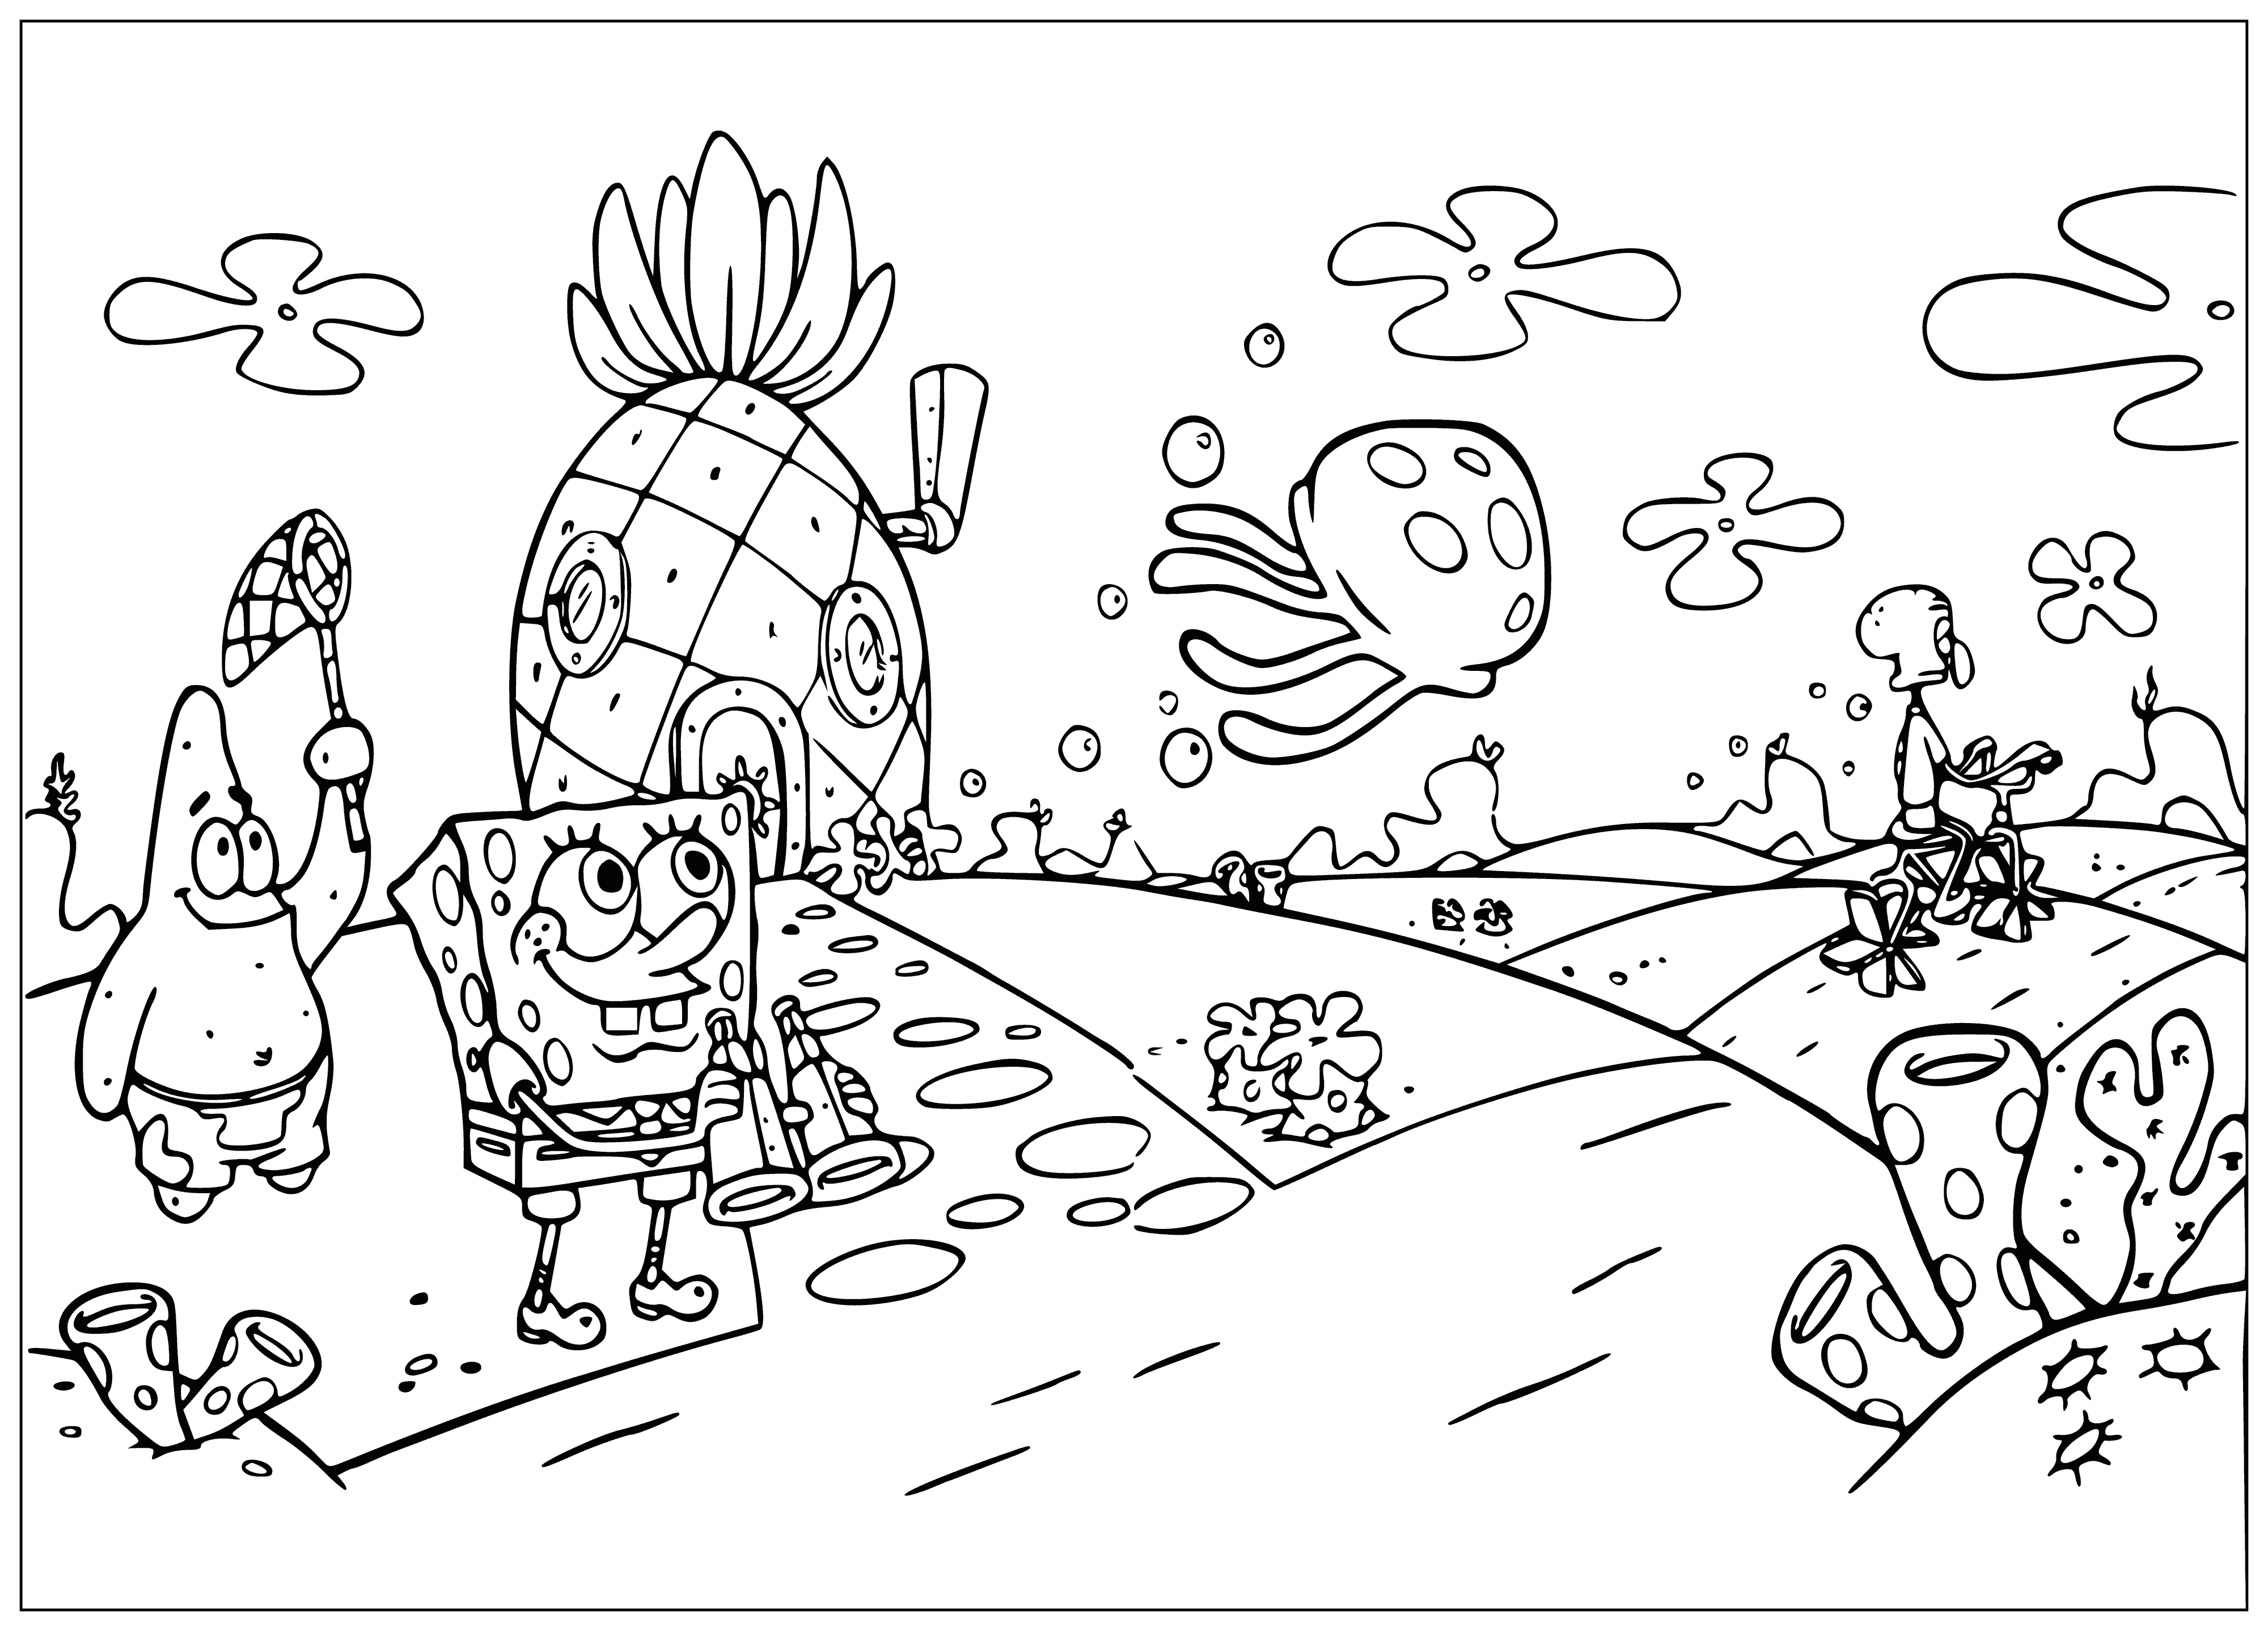 coloring page: SpongeBob is having a great time enjoying a beach day in a tropical setting with a surfboard, Hawaiian shirt and shorts. #spongebob